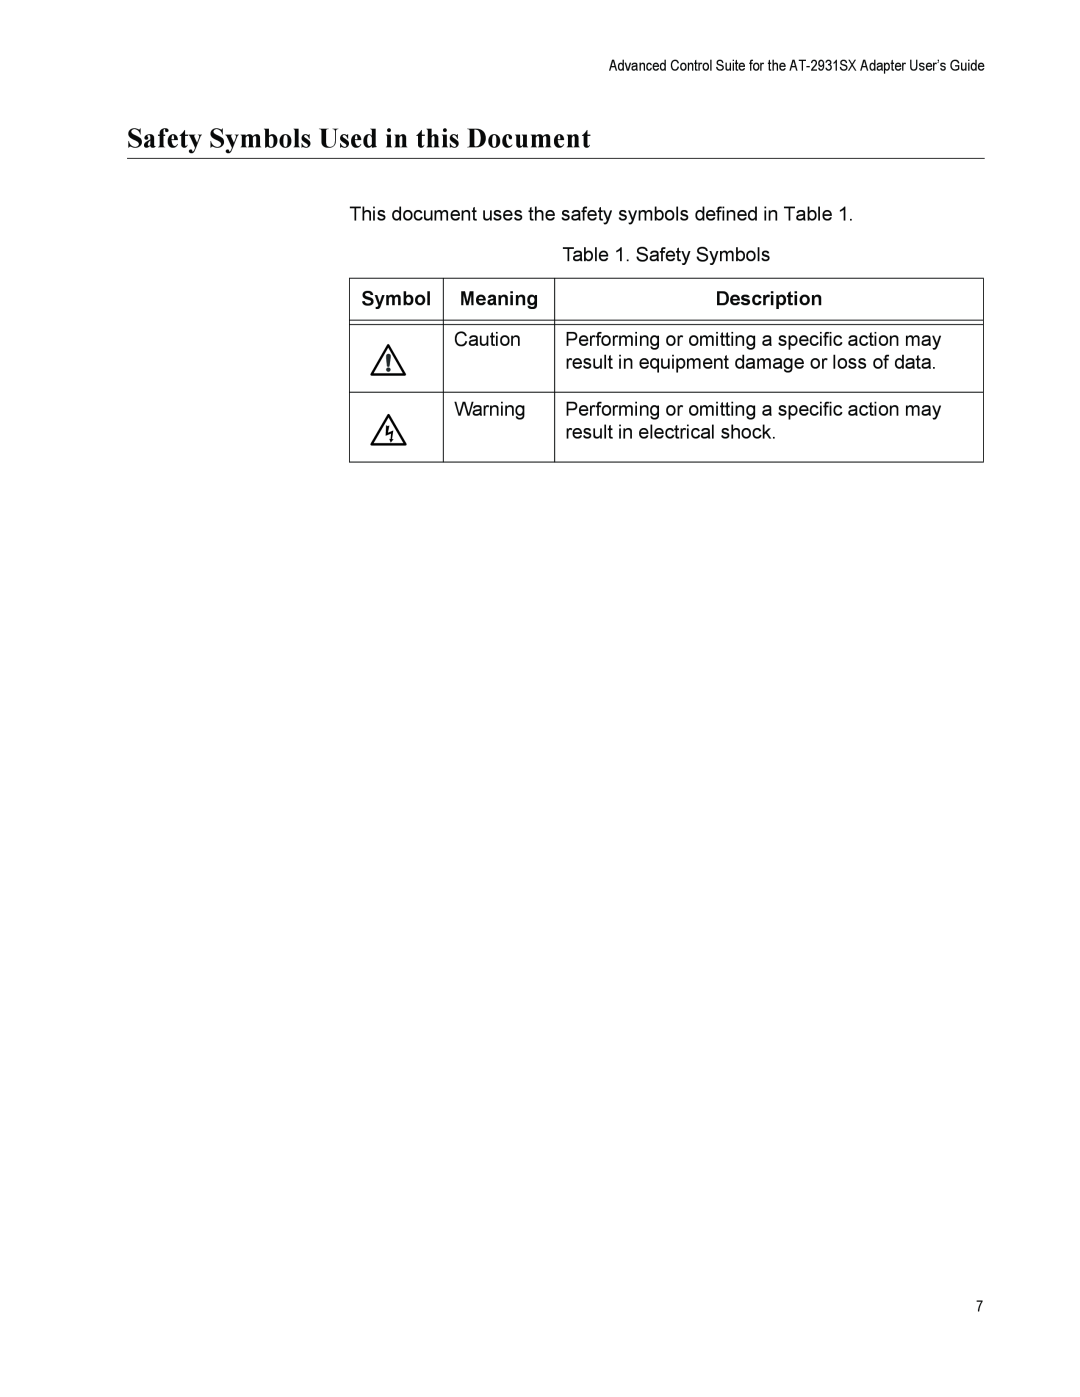 Allied Telesis AT-2931SX manual Safety Symbols Used in this Document, Meaning, Description 